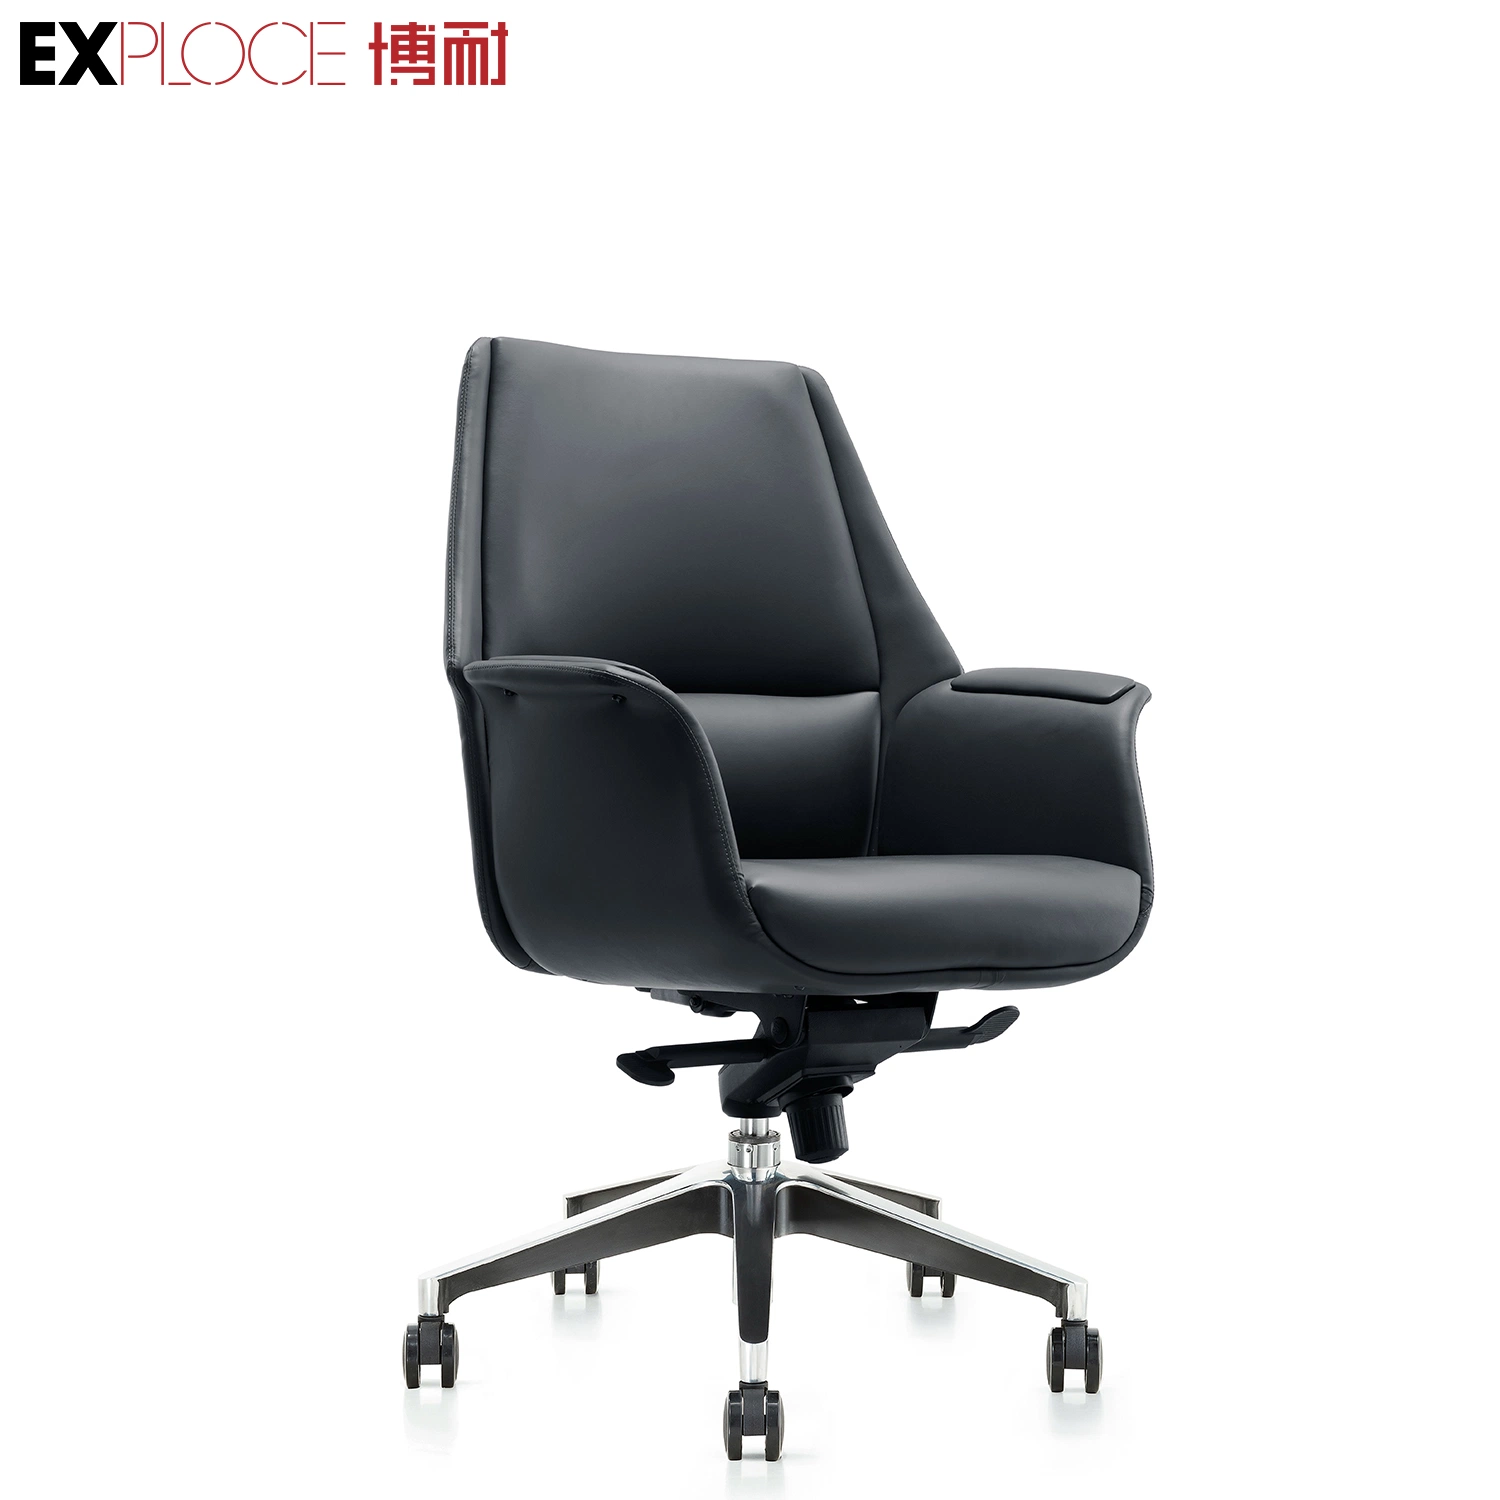 Professional Production Executive Leather Chair Chinese Office Furniture Commercial Furniture E810b